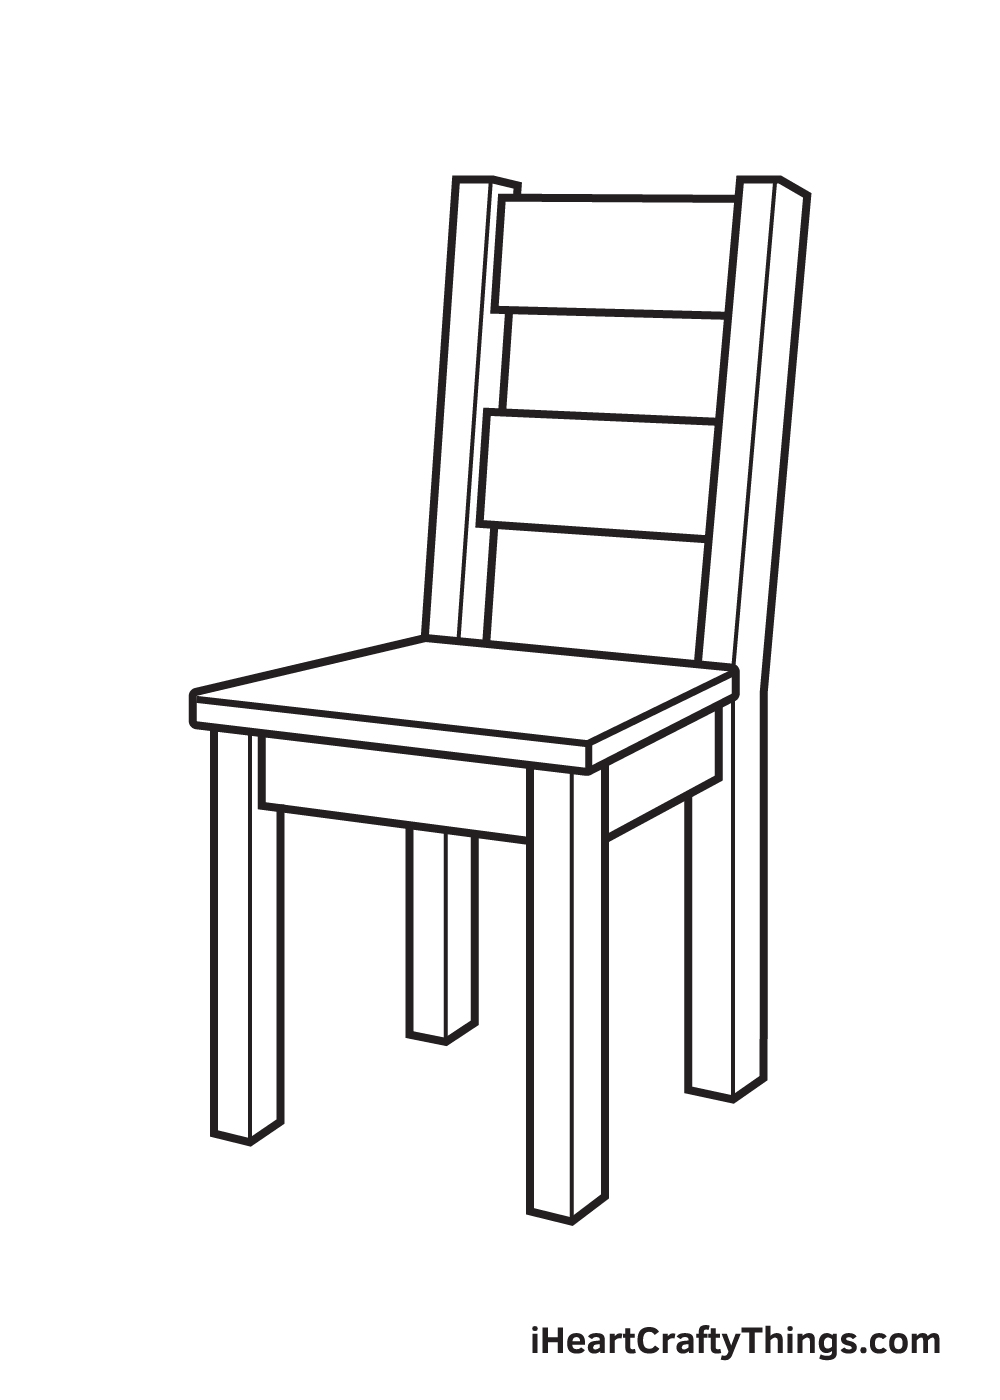 Drawing a chair - Step 8